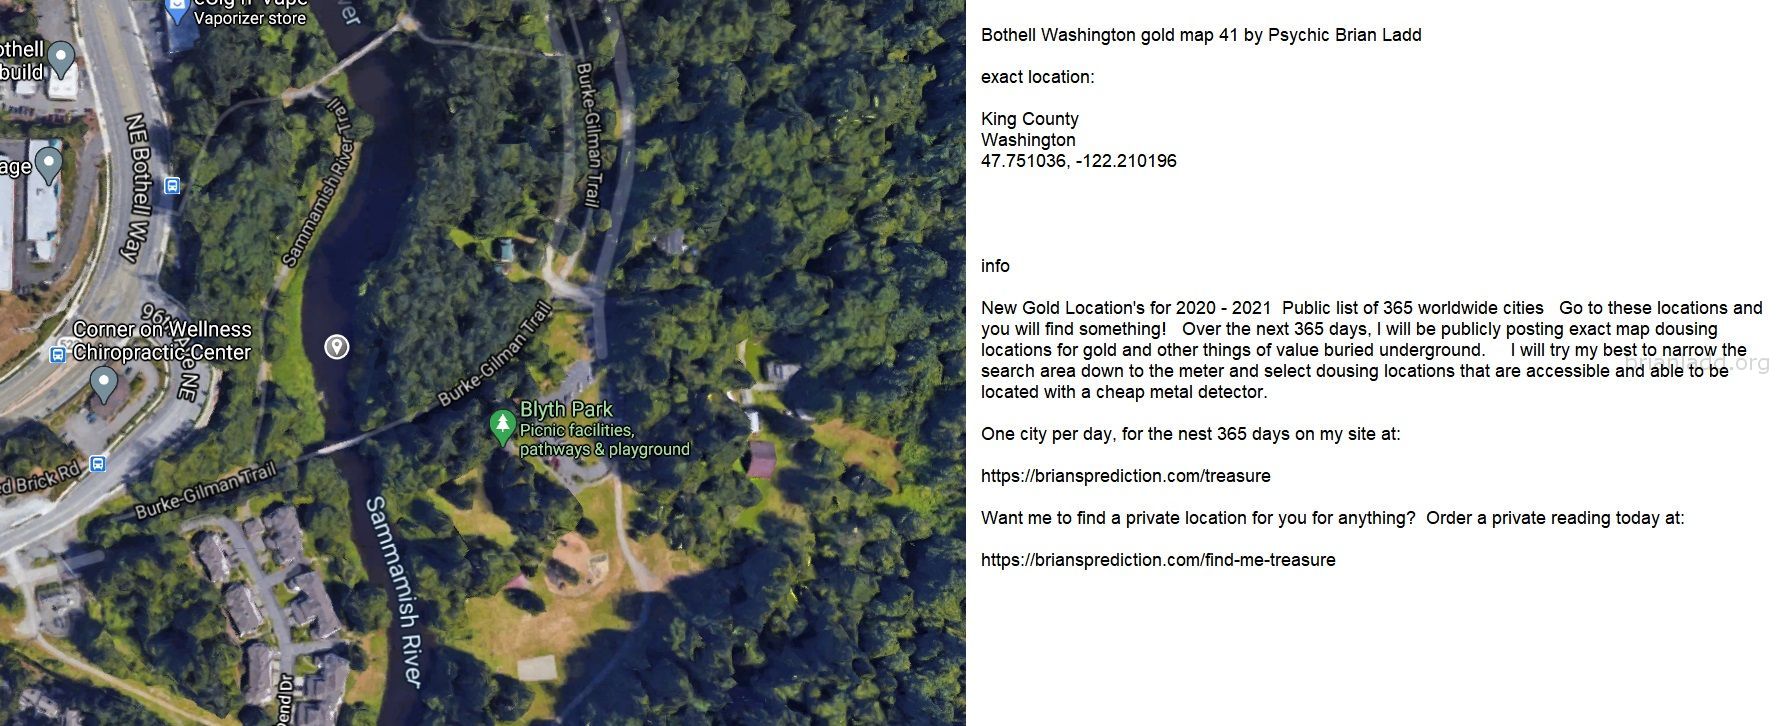 Bothell Washington gold map 41 by Psychic Brian Ladd
New Gold Location's for 2020 - 2021  Public list of 365 worldwide cities   Go to these locations and you will find something!   Over the next 365 days, I will be publicly posting exact map dousing locations for gold and other things of value buried underground.     I will try my best to narrow the search area down to the meter and select dousing locations that are accessible and able to be located with a cheap metal detector. One city per day, for the nest 365 days on my site at:  https://briansprediction.com/treasure  Want me to find a private location for you for anything?  Order a private reading today at:  https://briansprediction.com/find-me-treasure
